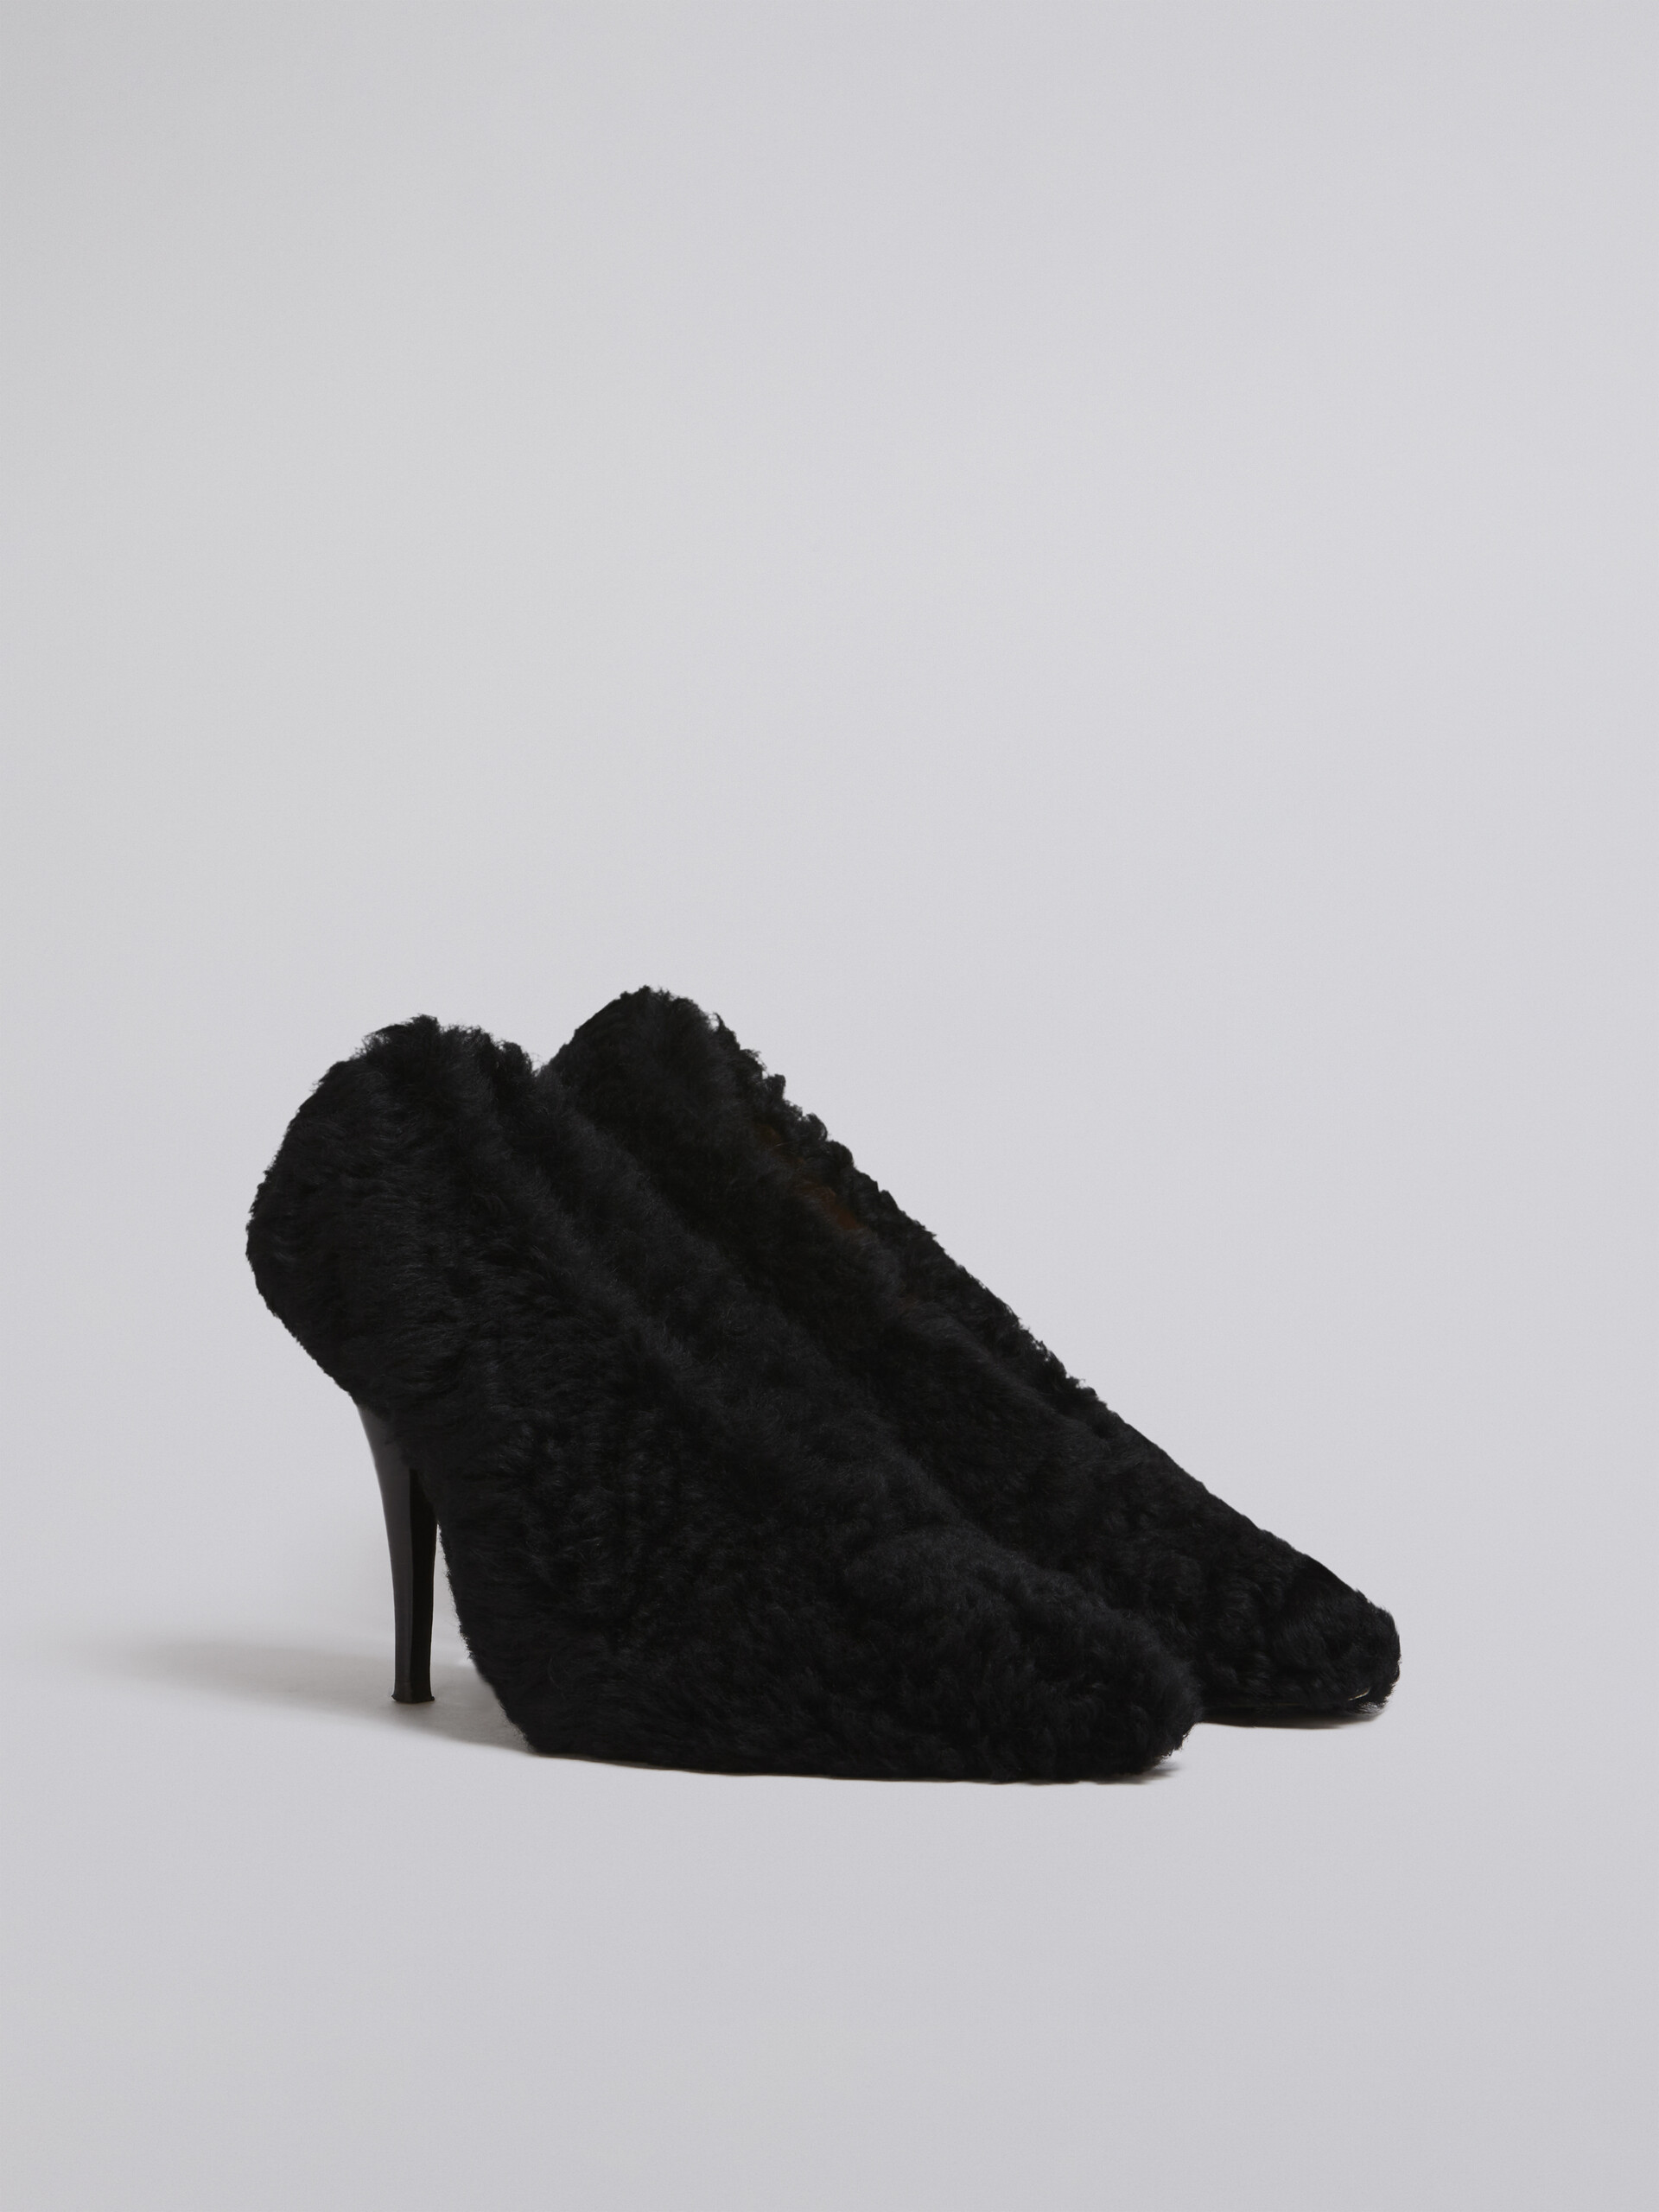 Shearling pump with heel covered in nappa - Pumps - Image 2